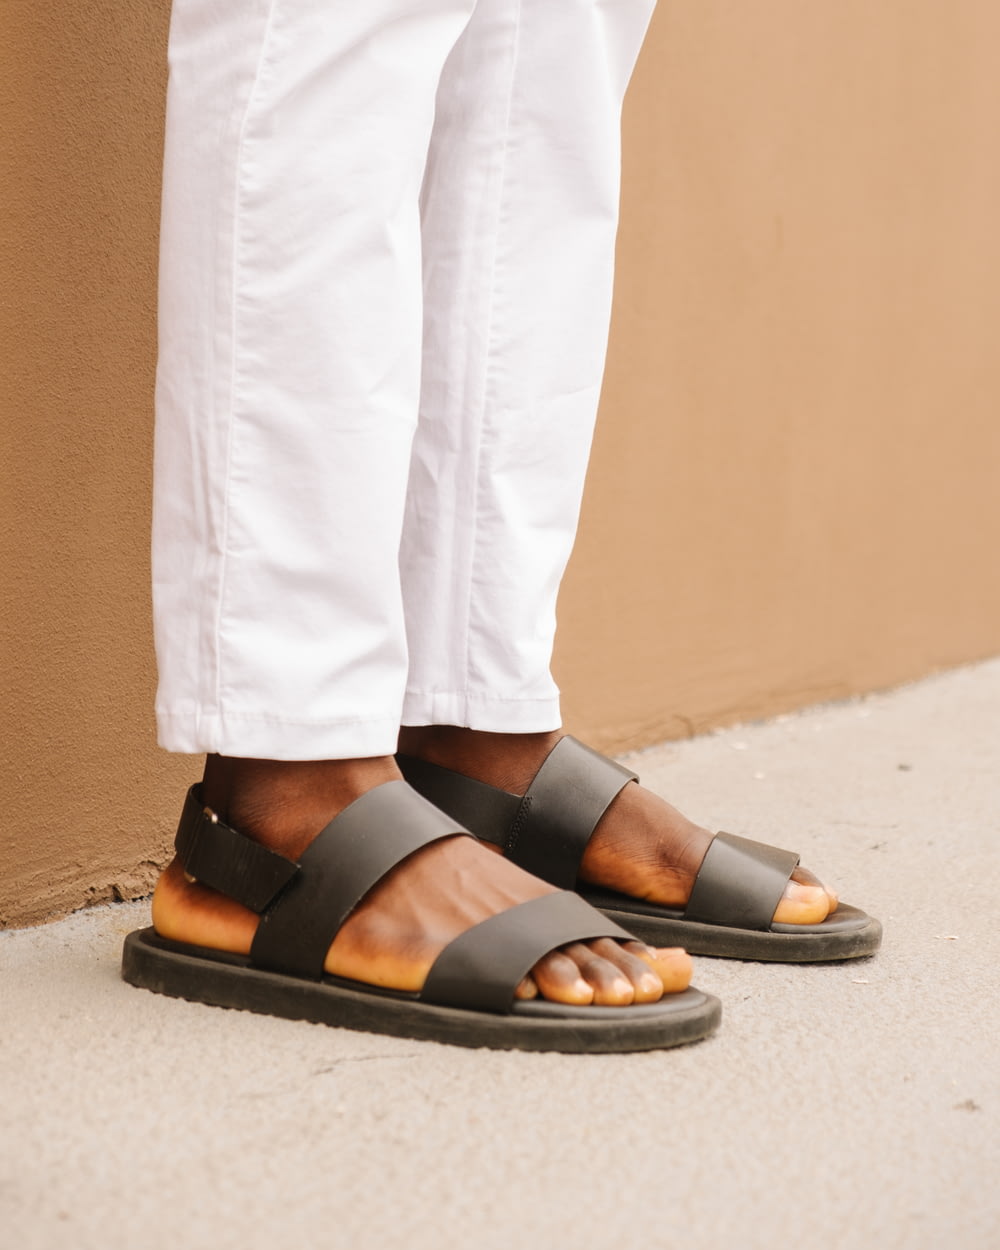 person wearing black leather sandals